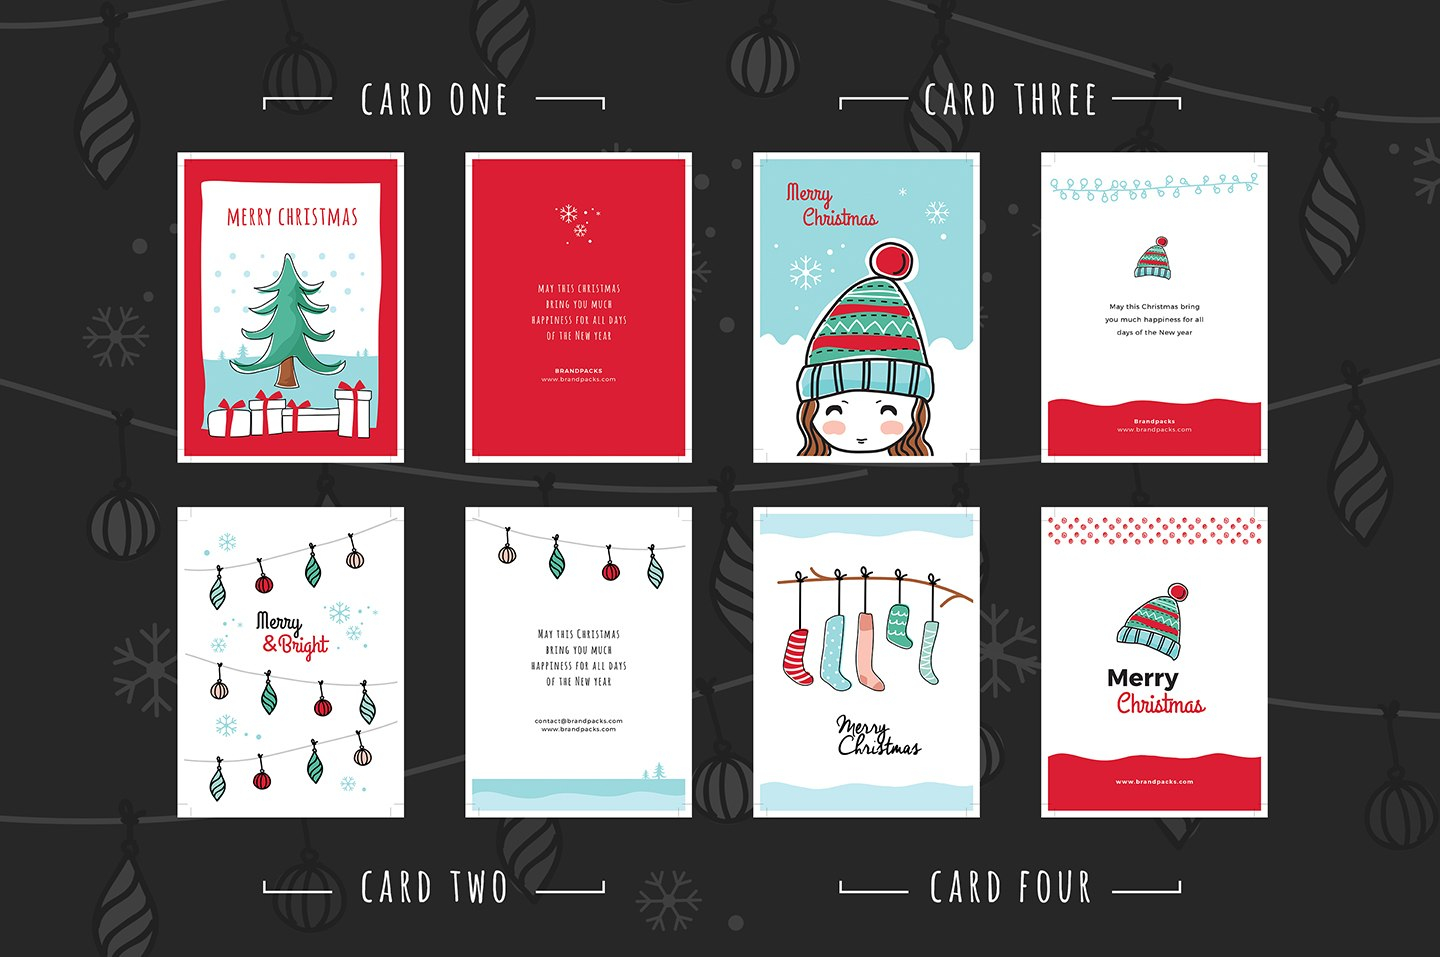 Free Christmas Card Templates For Photoshop  Illustrator  Brandpacks throughout Free Christmas Card Templates For Photoshop